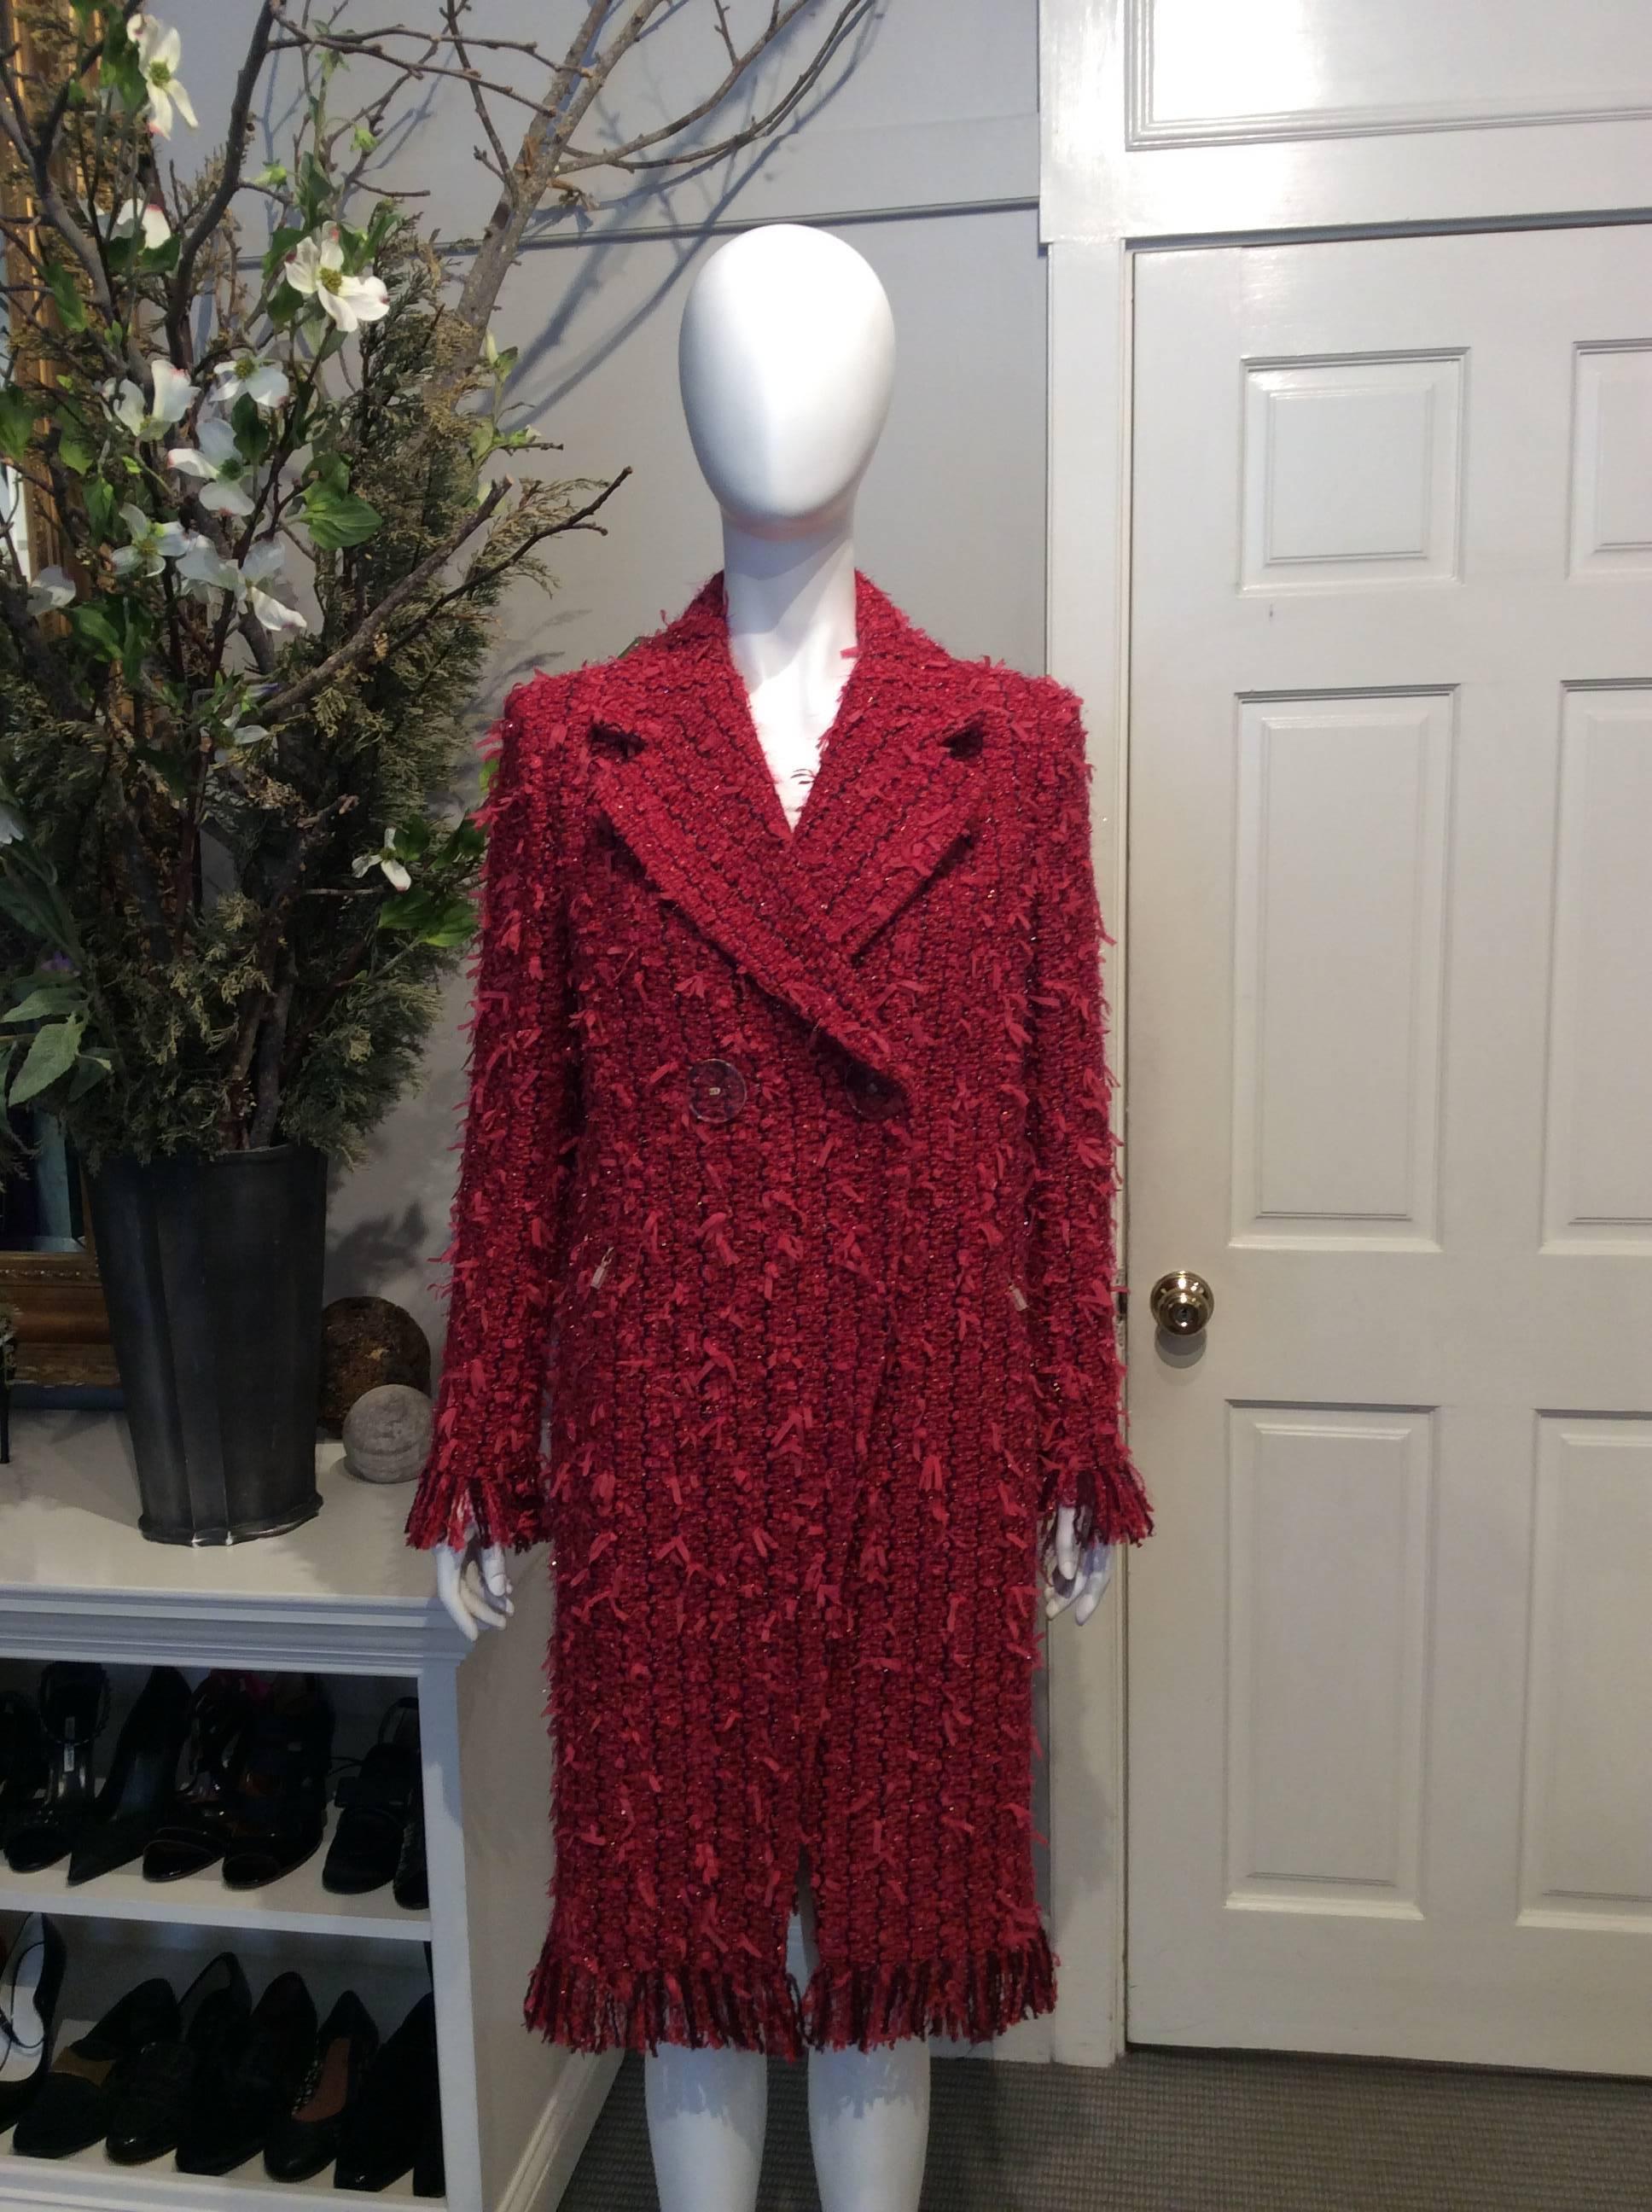 Chanel raspberry, red, and plum full-length double-breasted Fantasy Tweed coat from the pre-Fall 2017 collection. Ribboned accents throughout tweed. Fringe on sleeves and at bottom of coat. Dual pockets with gold zippers. Gold zipper on each sleeve.